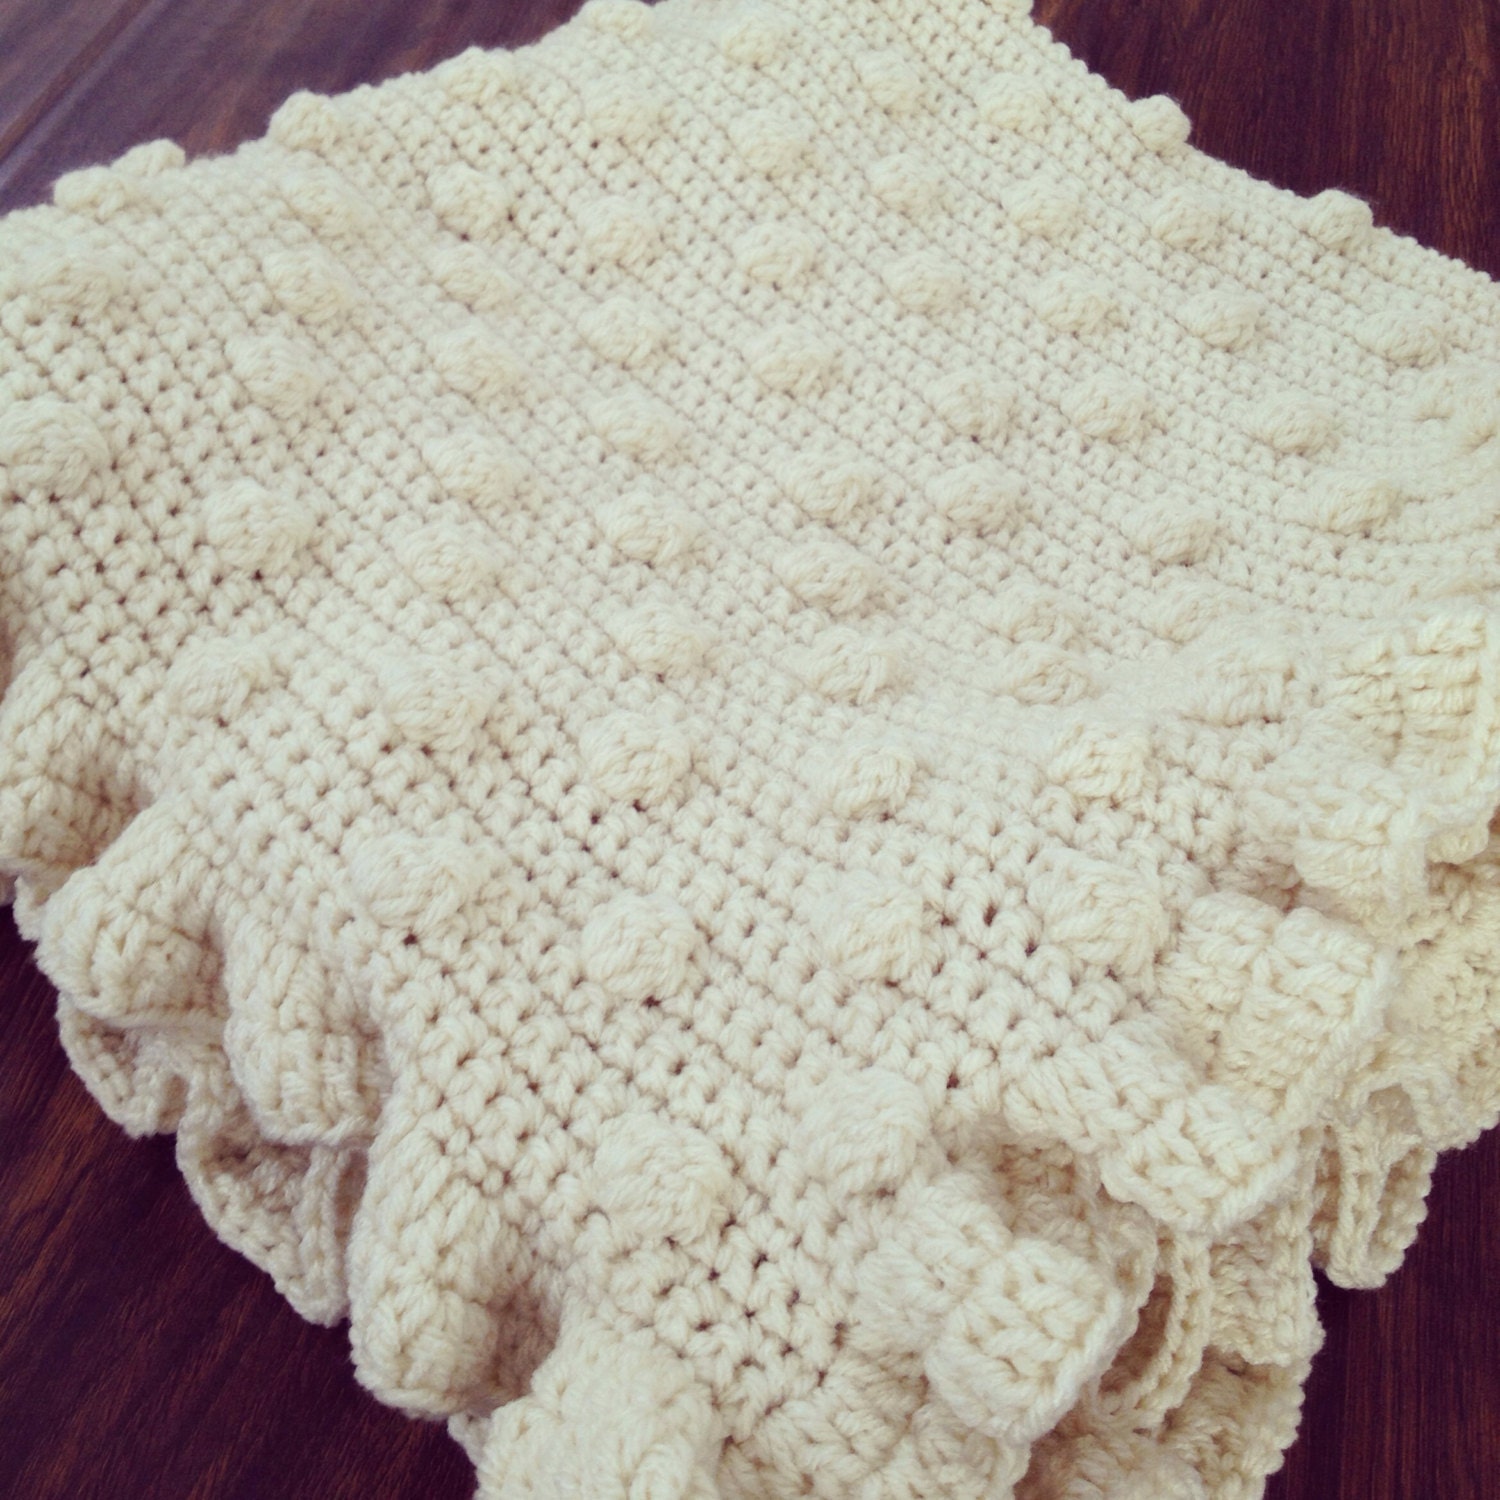 Sale The Reese Baby Blanket Crochet with Ruffles by straighthookin